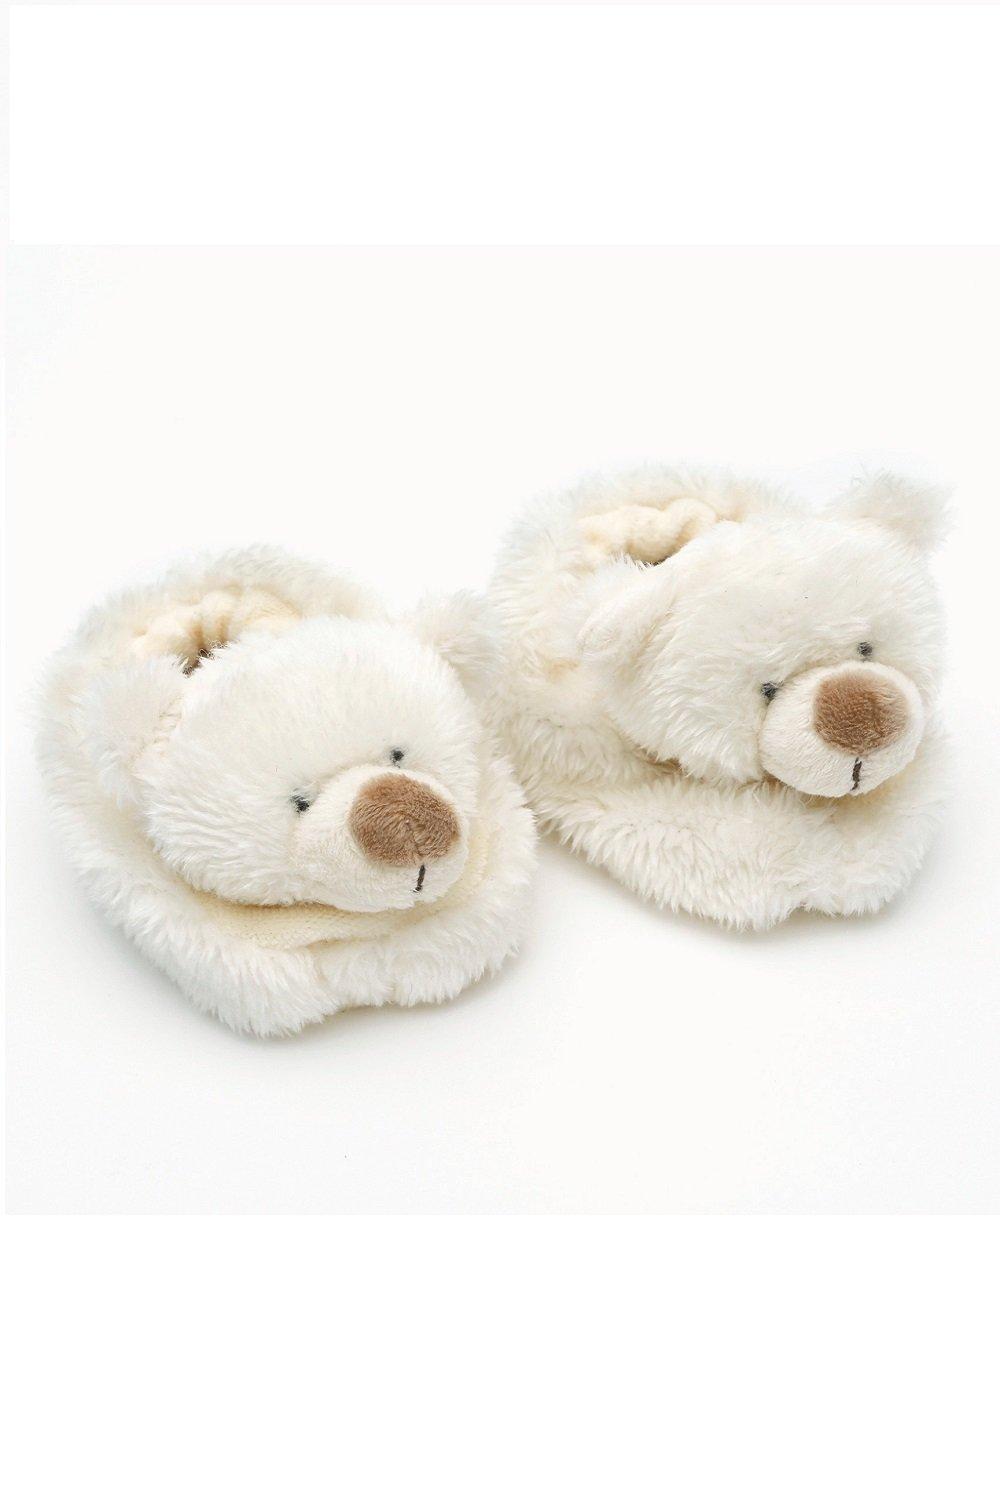 Bear Baby Slippers 0-6 months